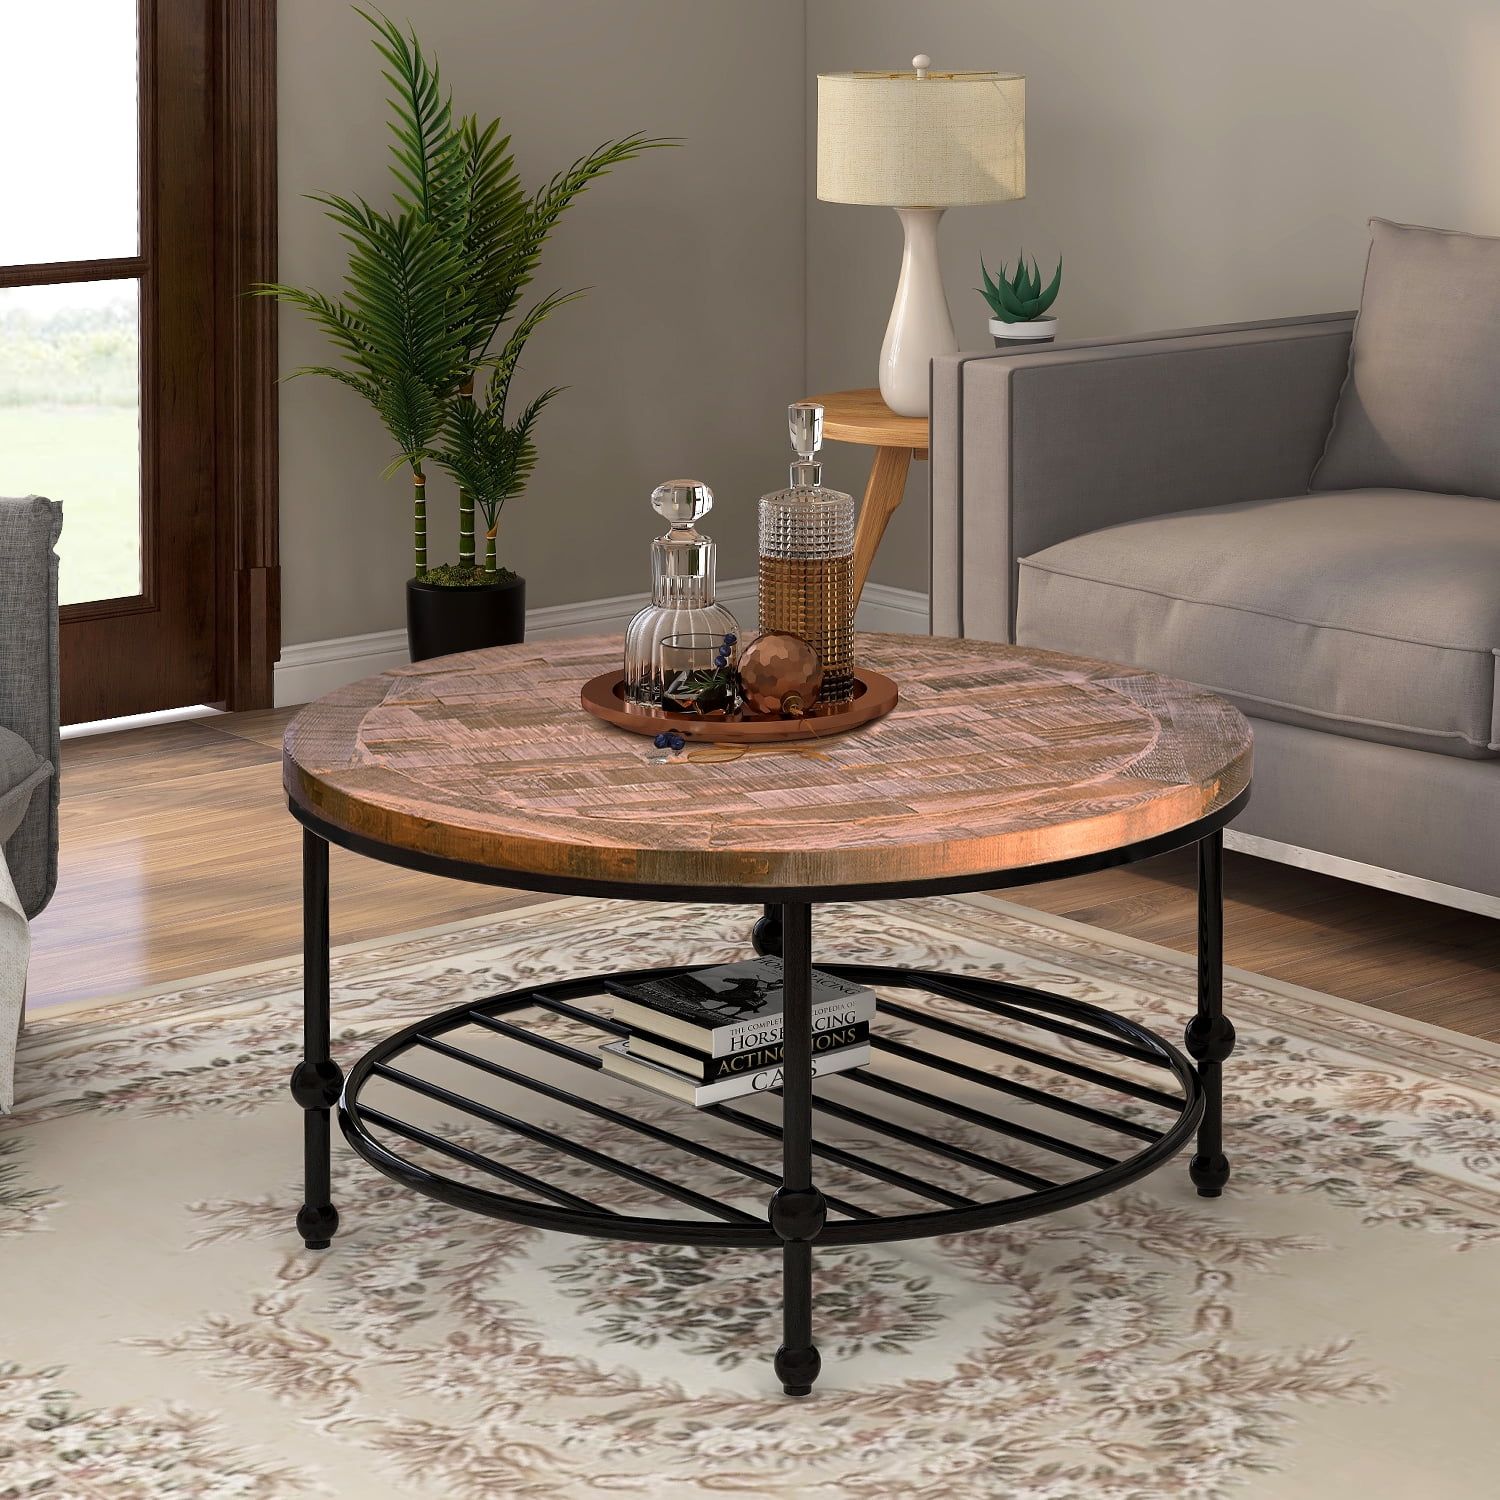 Rustic Natural Round Coffee Table With Storage Shelf For Living Room In Coffee Tables With Open Storage Shelves (View 11 of 15)